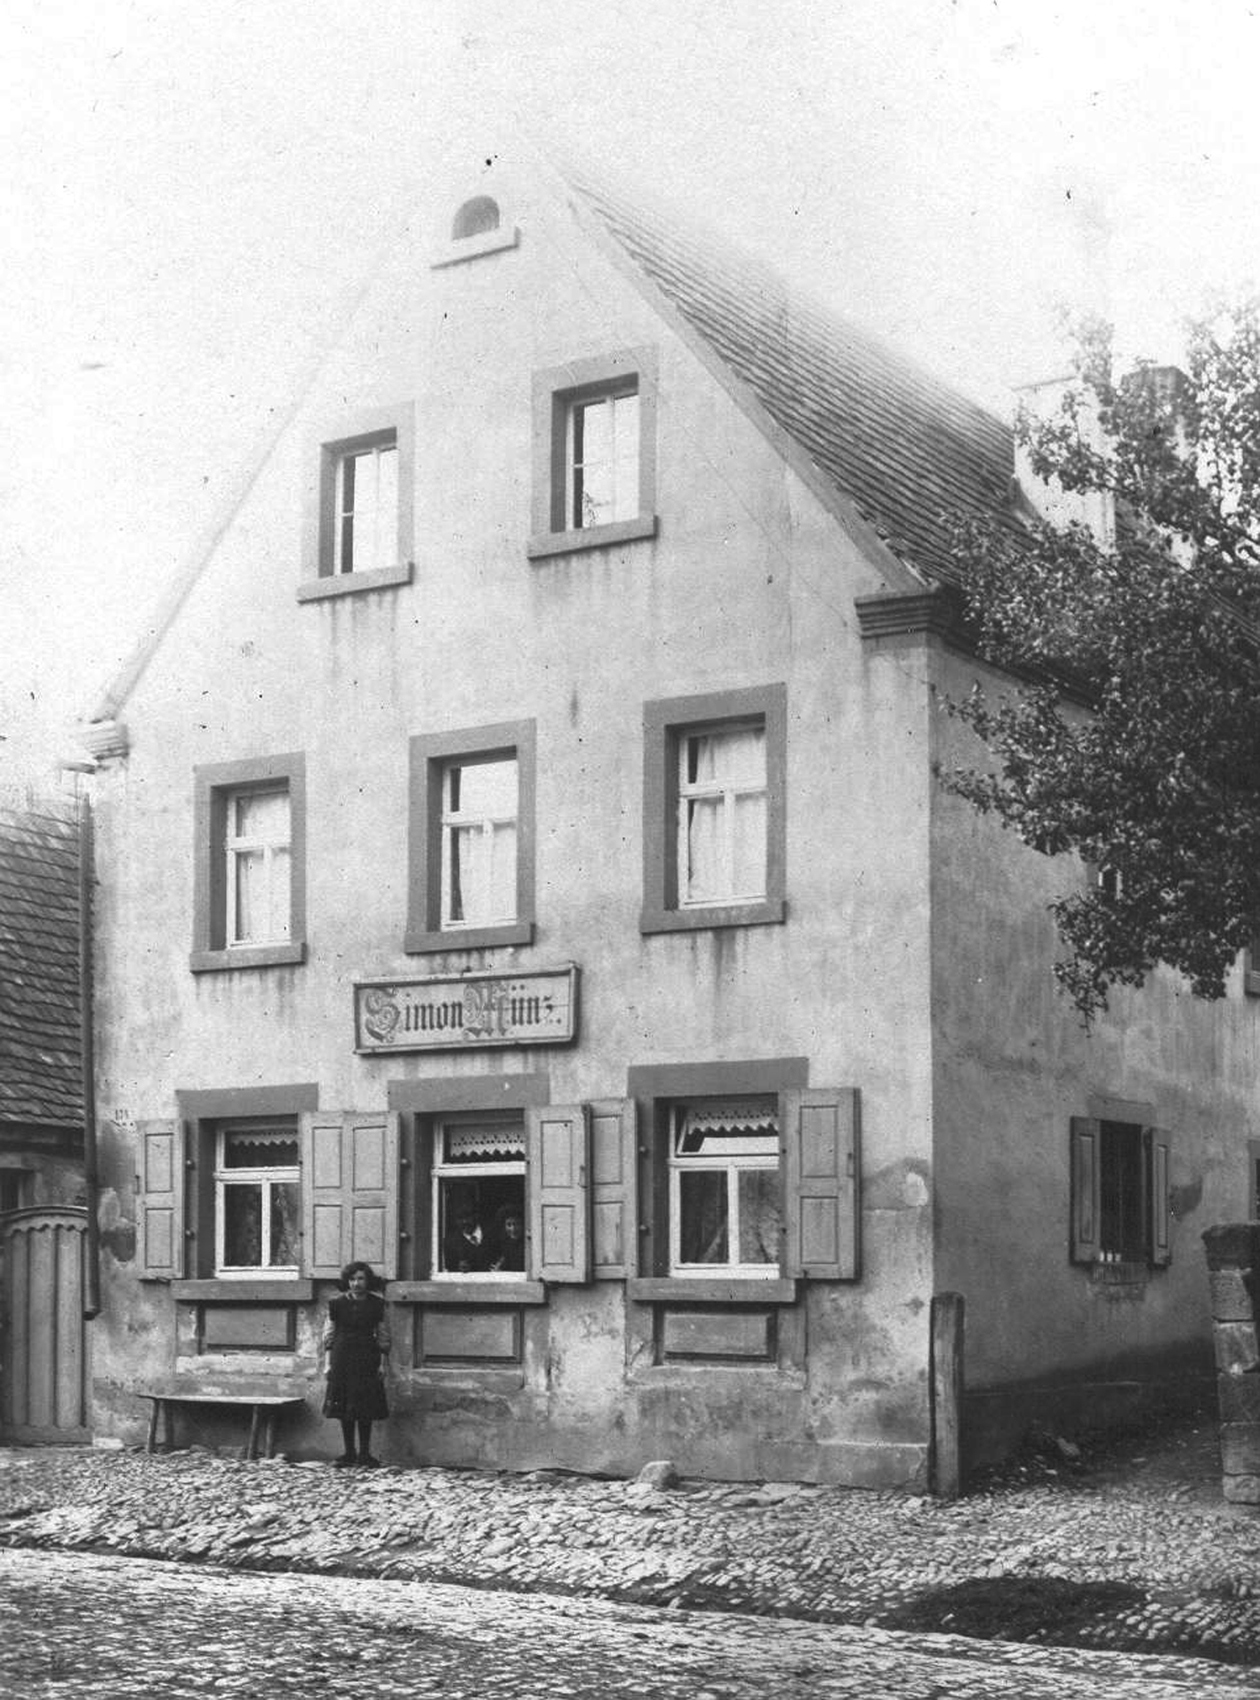 The Fröhlich house and shop in Wiesenbronn.